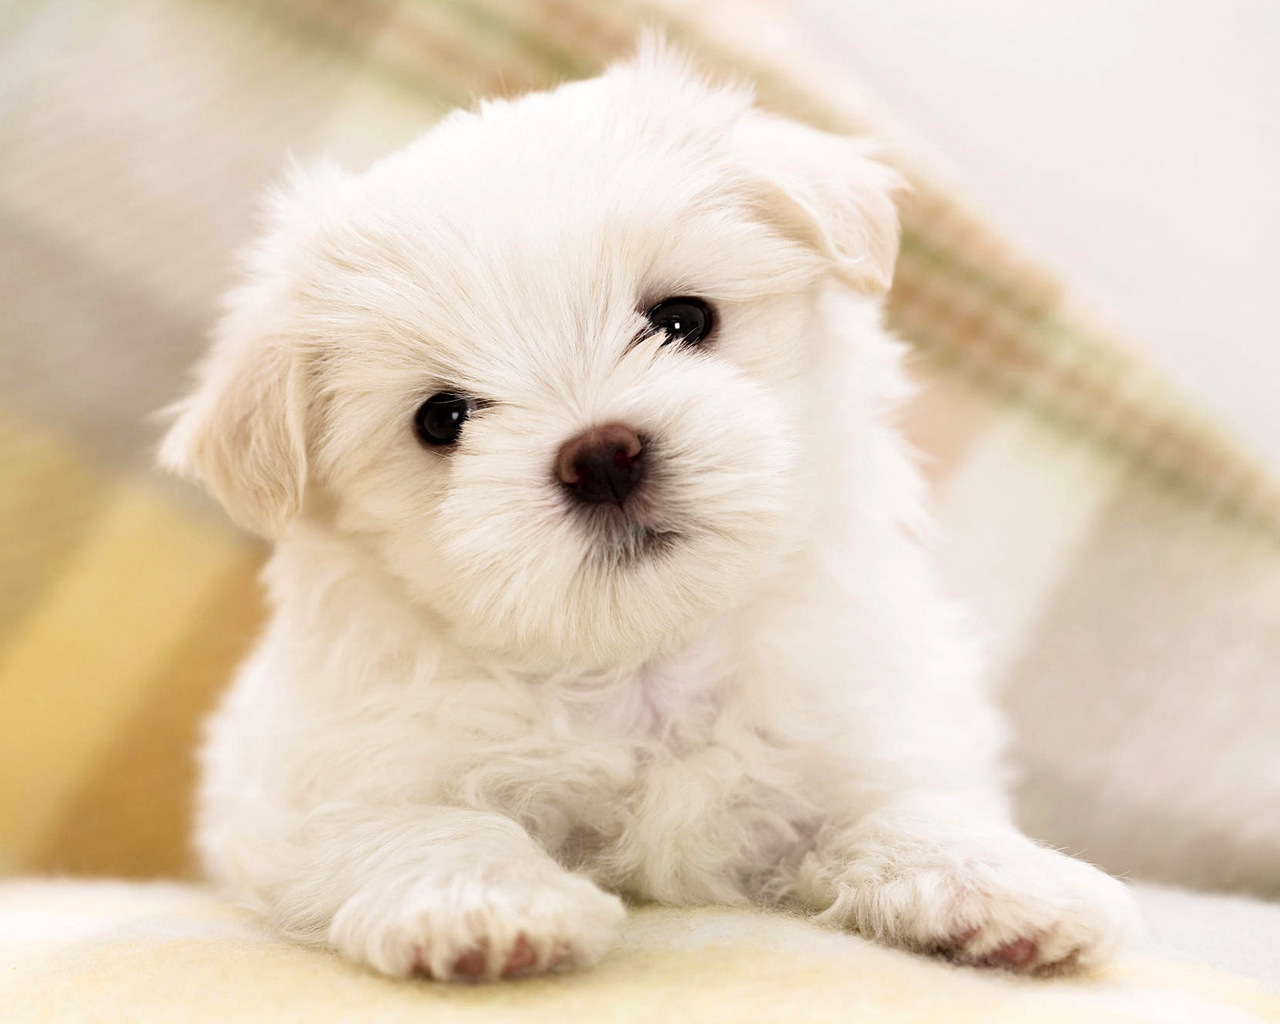 Poodle Puppy Wallpaper On